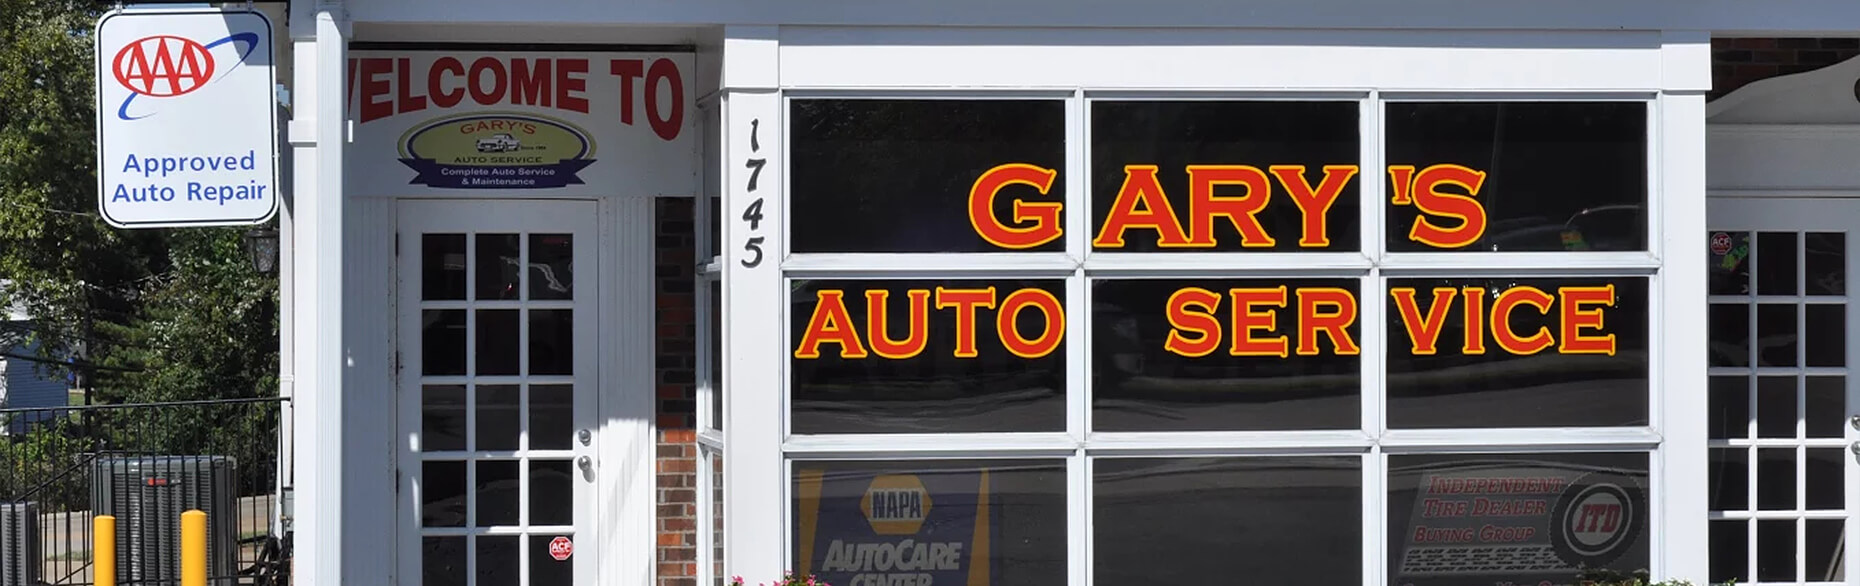 About Us | Gary's Auto Service